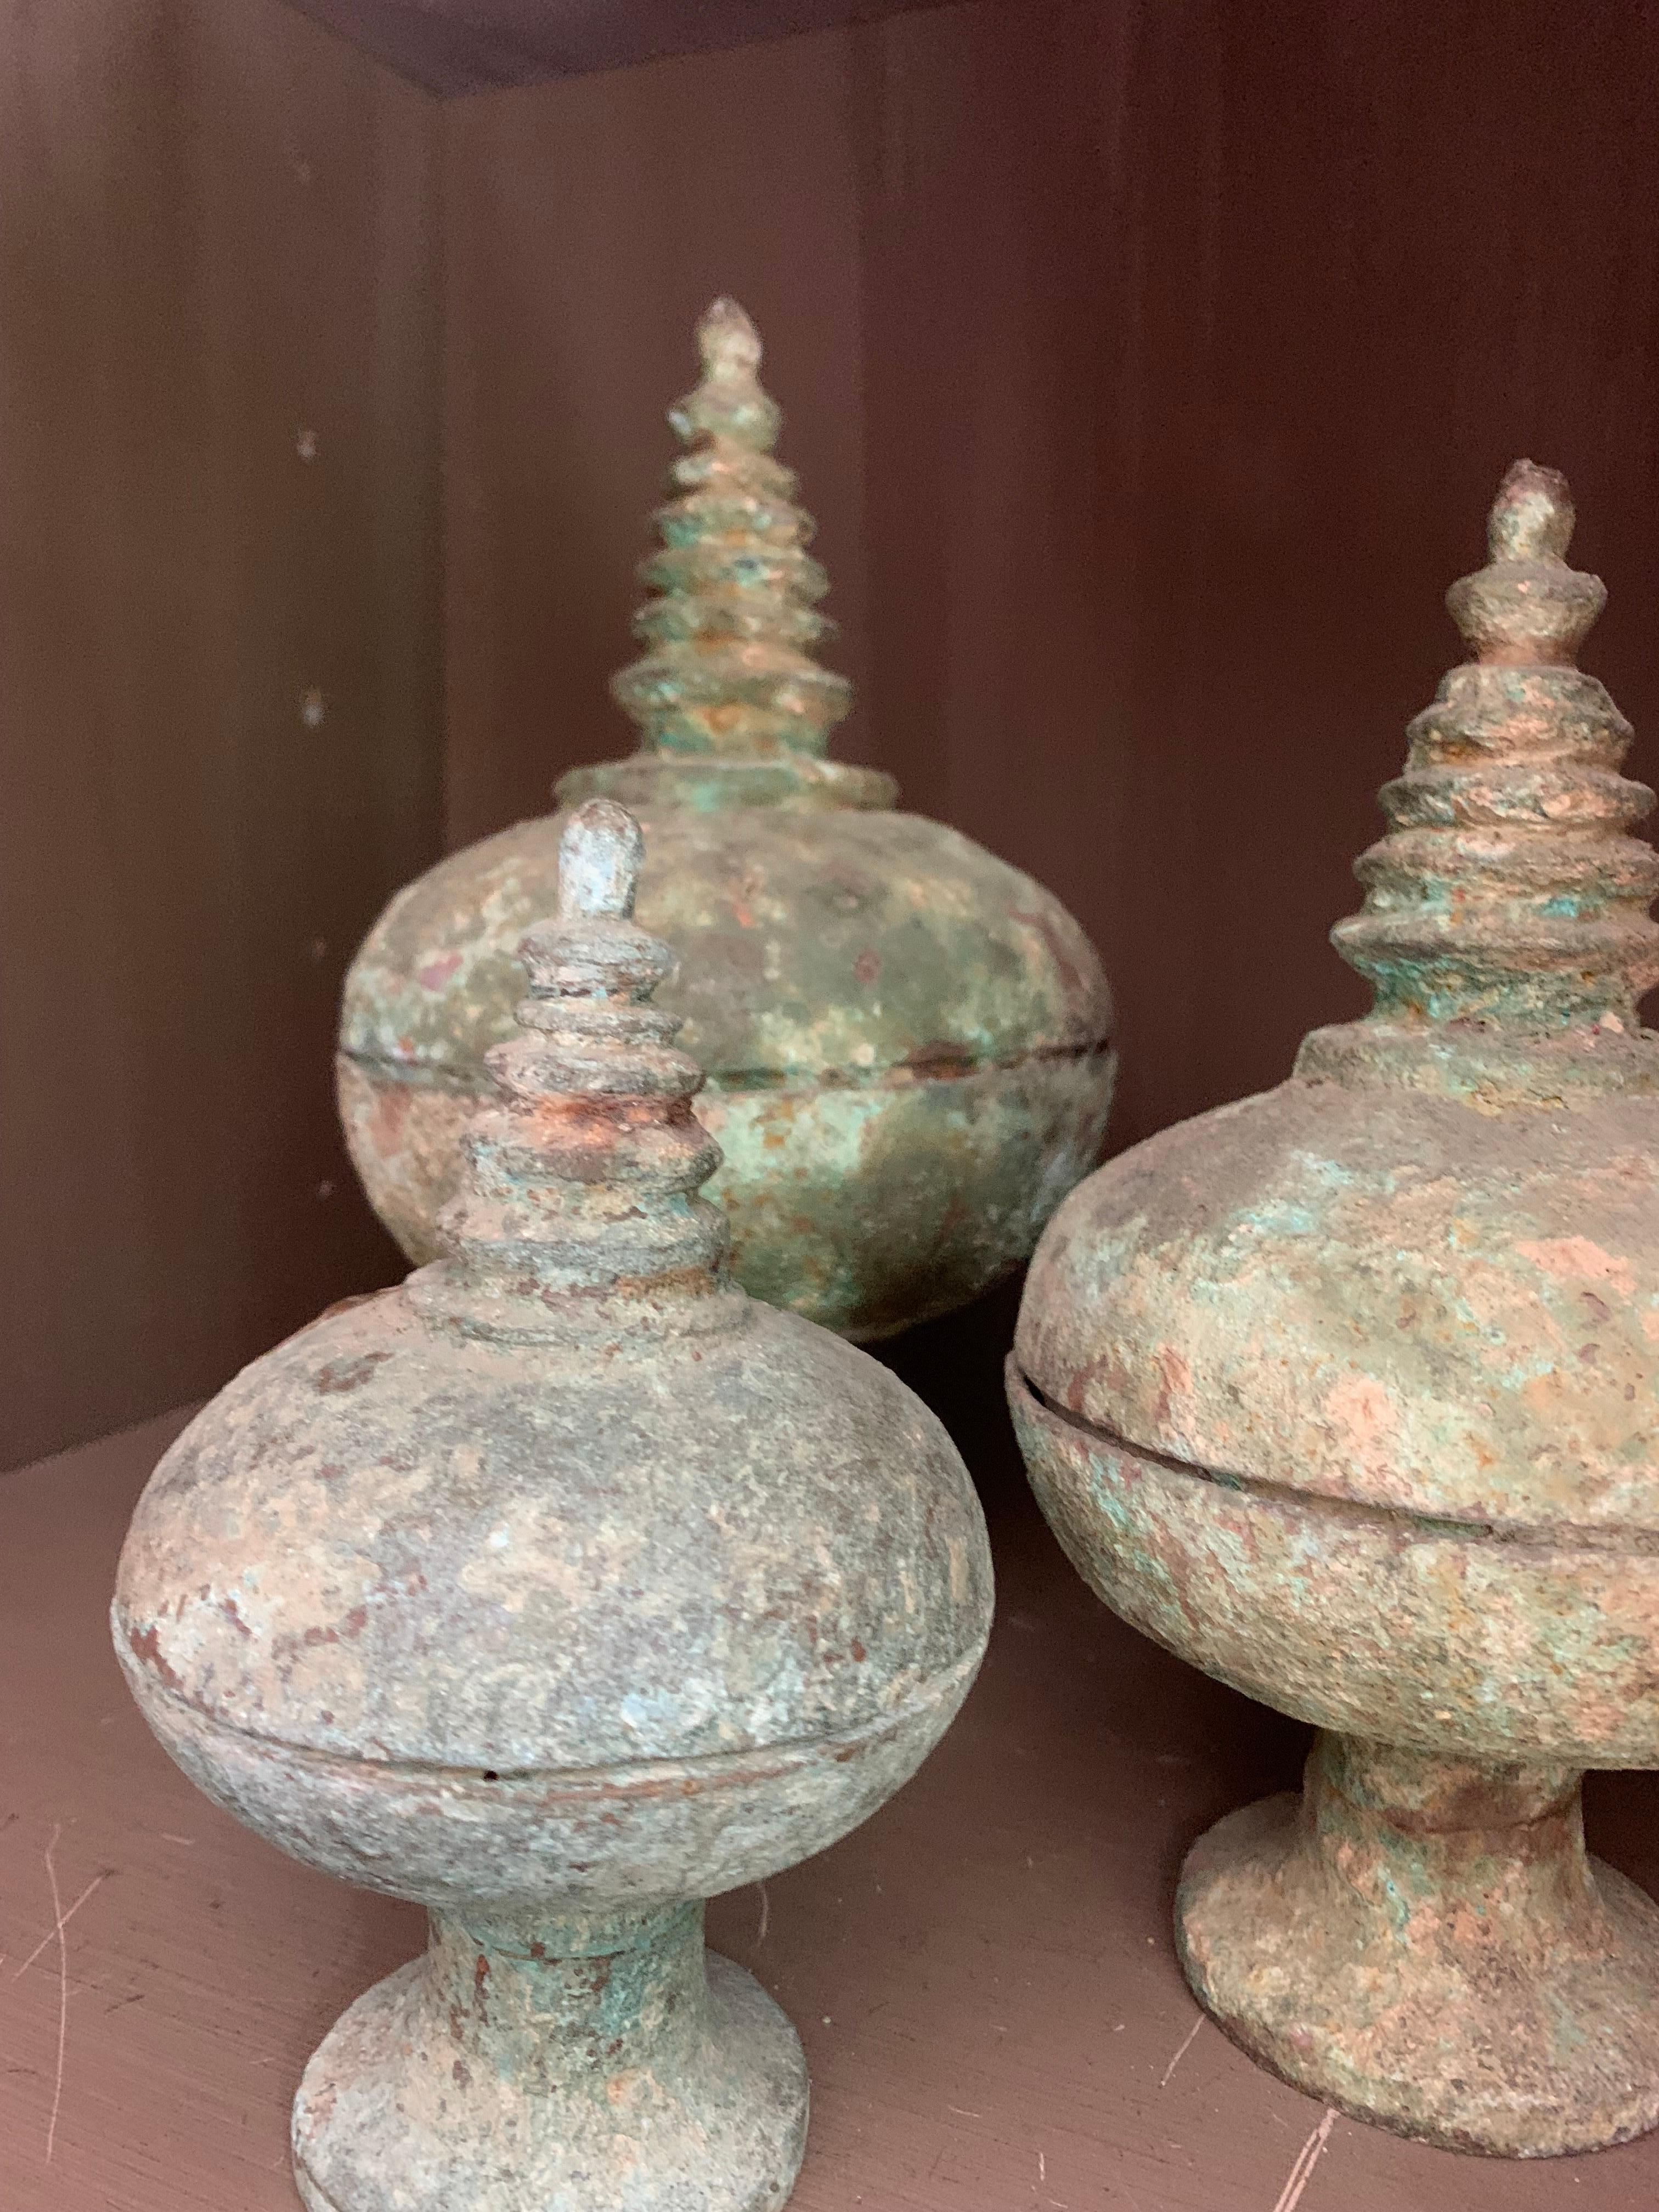 A set of 3 Chinese bronze ritual cups with pagoda shaped cover. In archaic style probably 18th or 19th century. Great patina, no cracks.